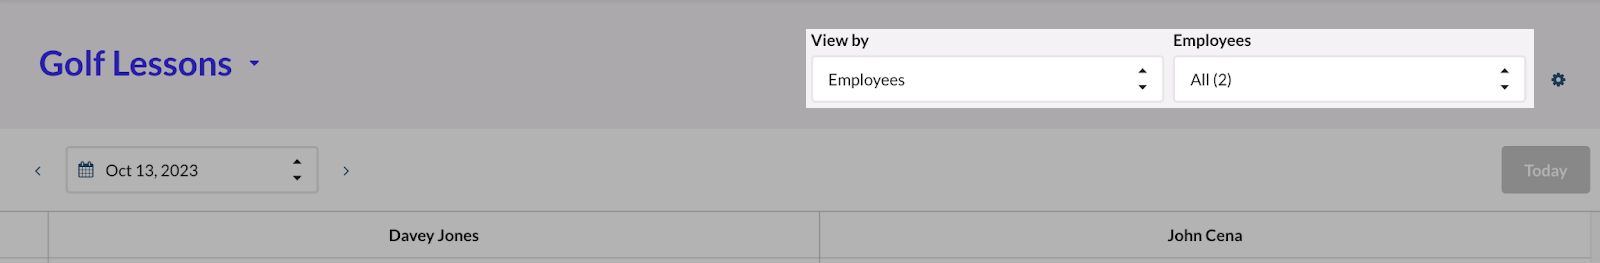 View and filtering options to sort scheduling reservations by employee or location